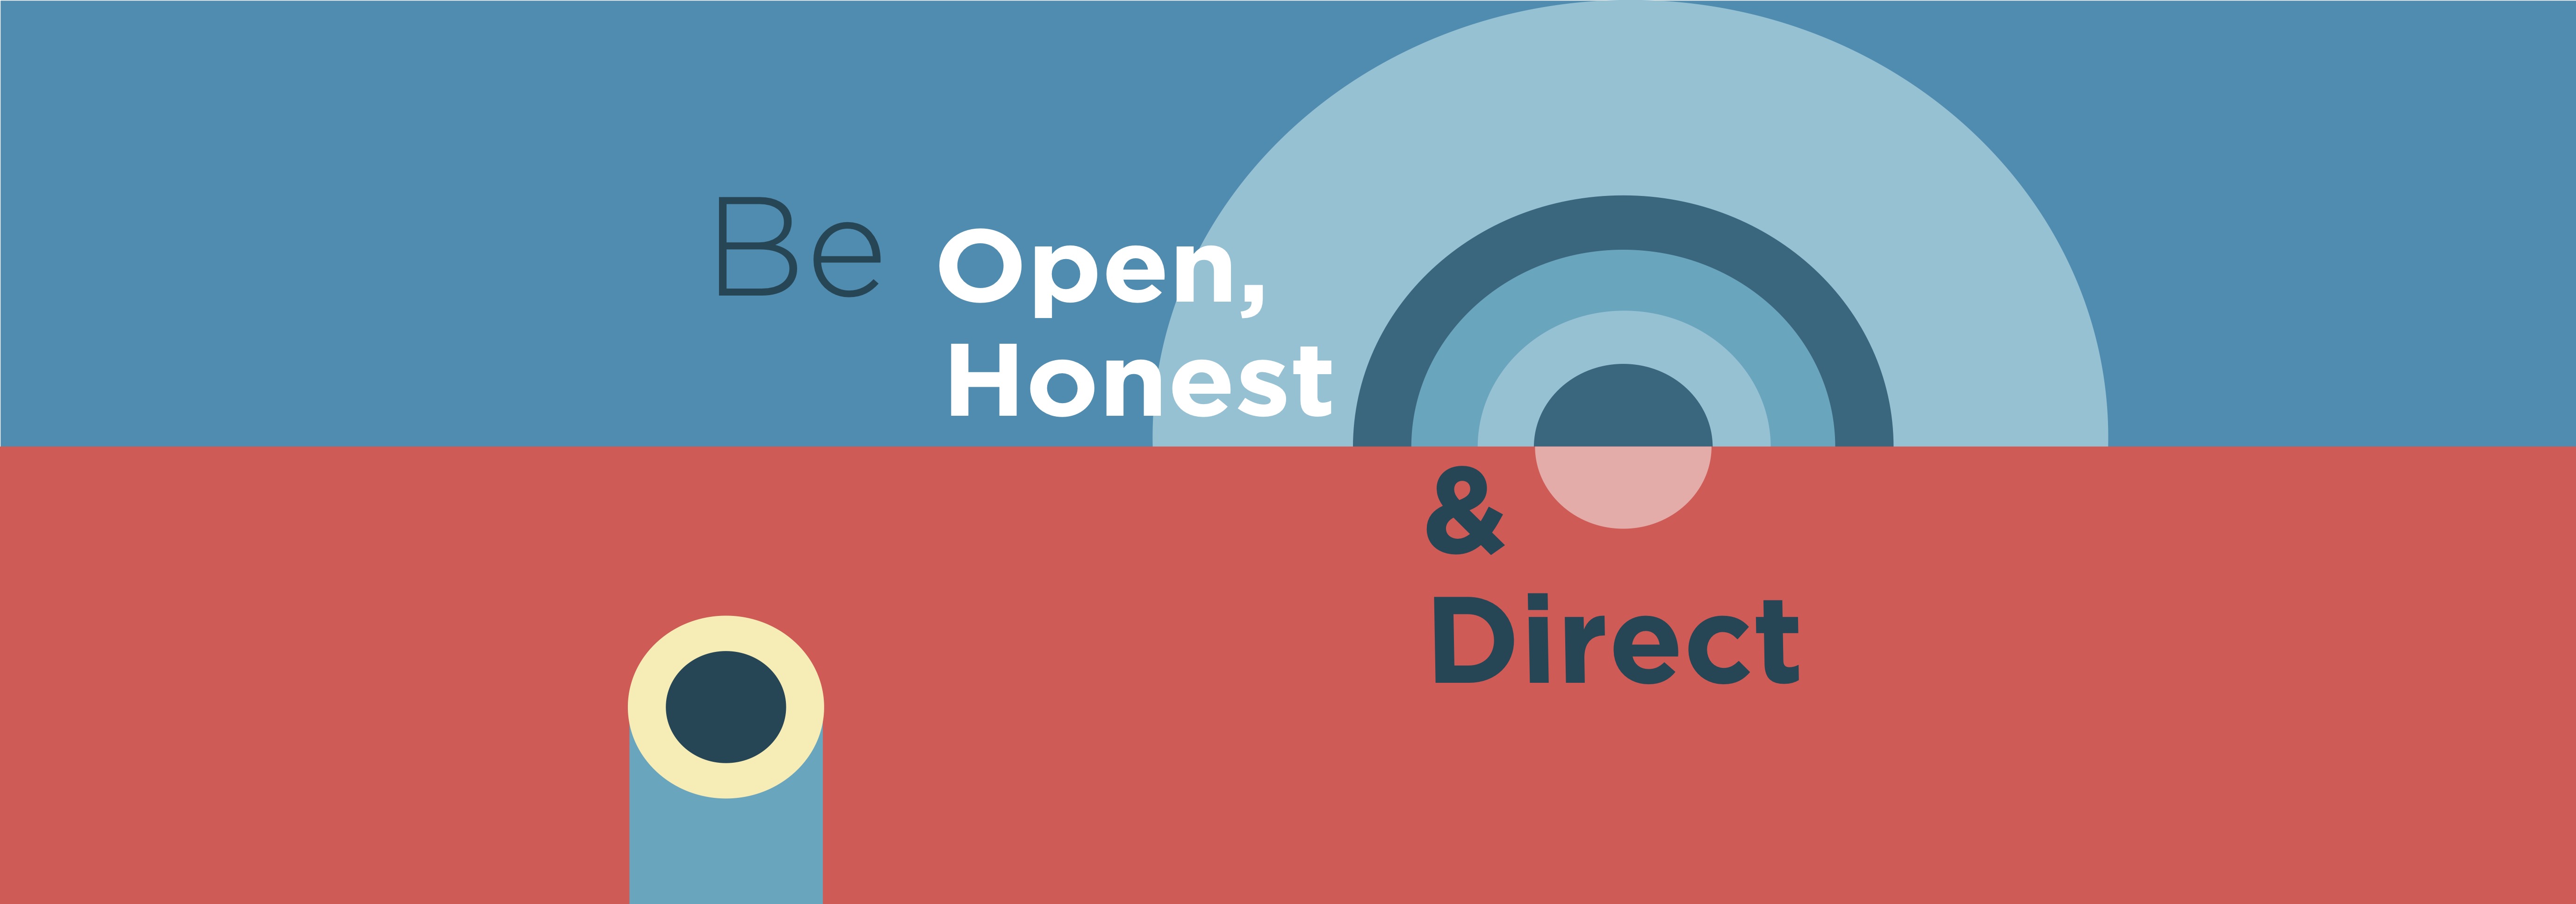 open honest and direct in speech or writing